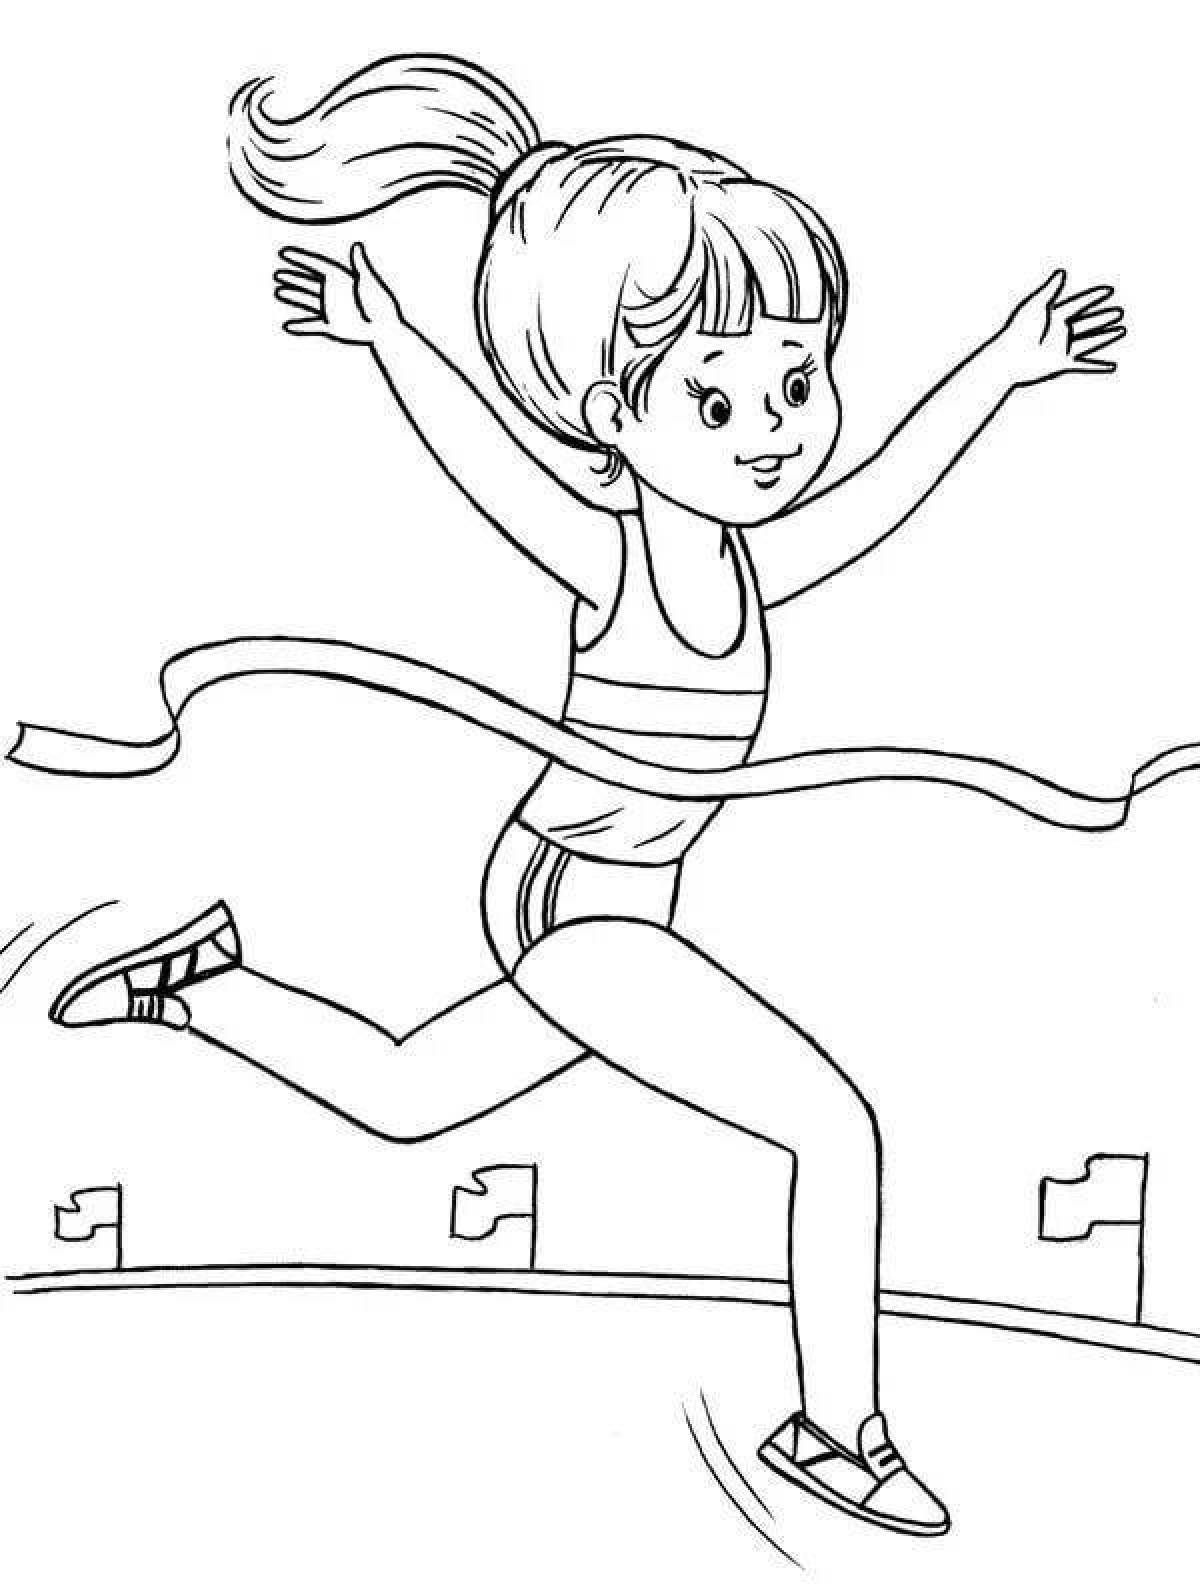 Color-frenzy coloring page project playtime